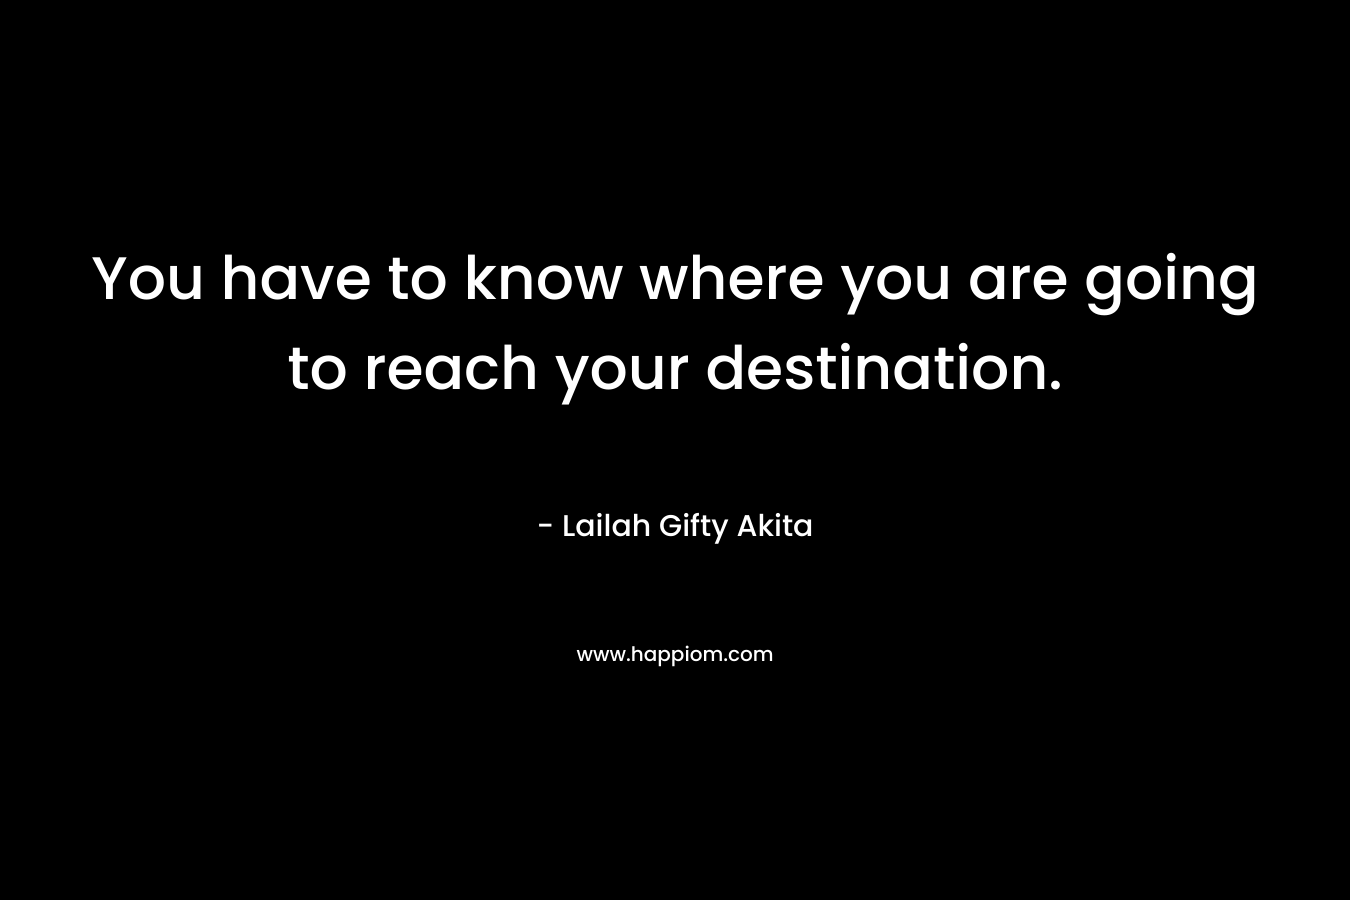 You have to know where you are going to reach your destination.